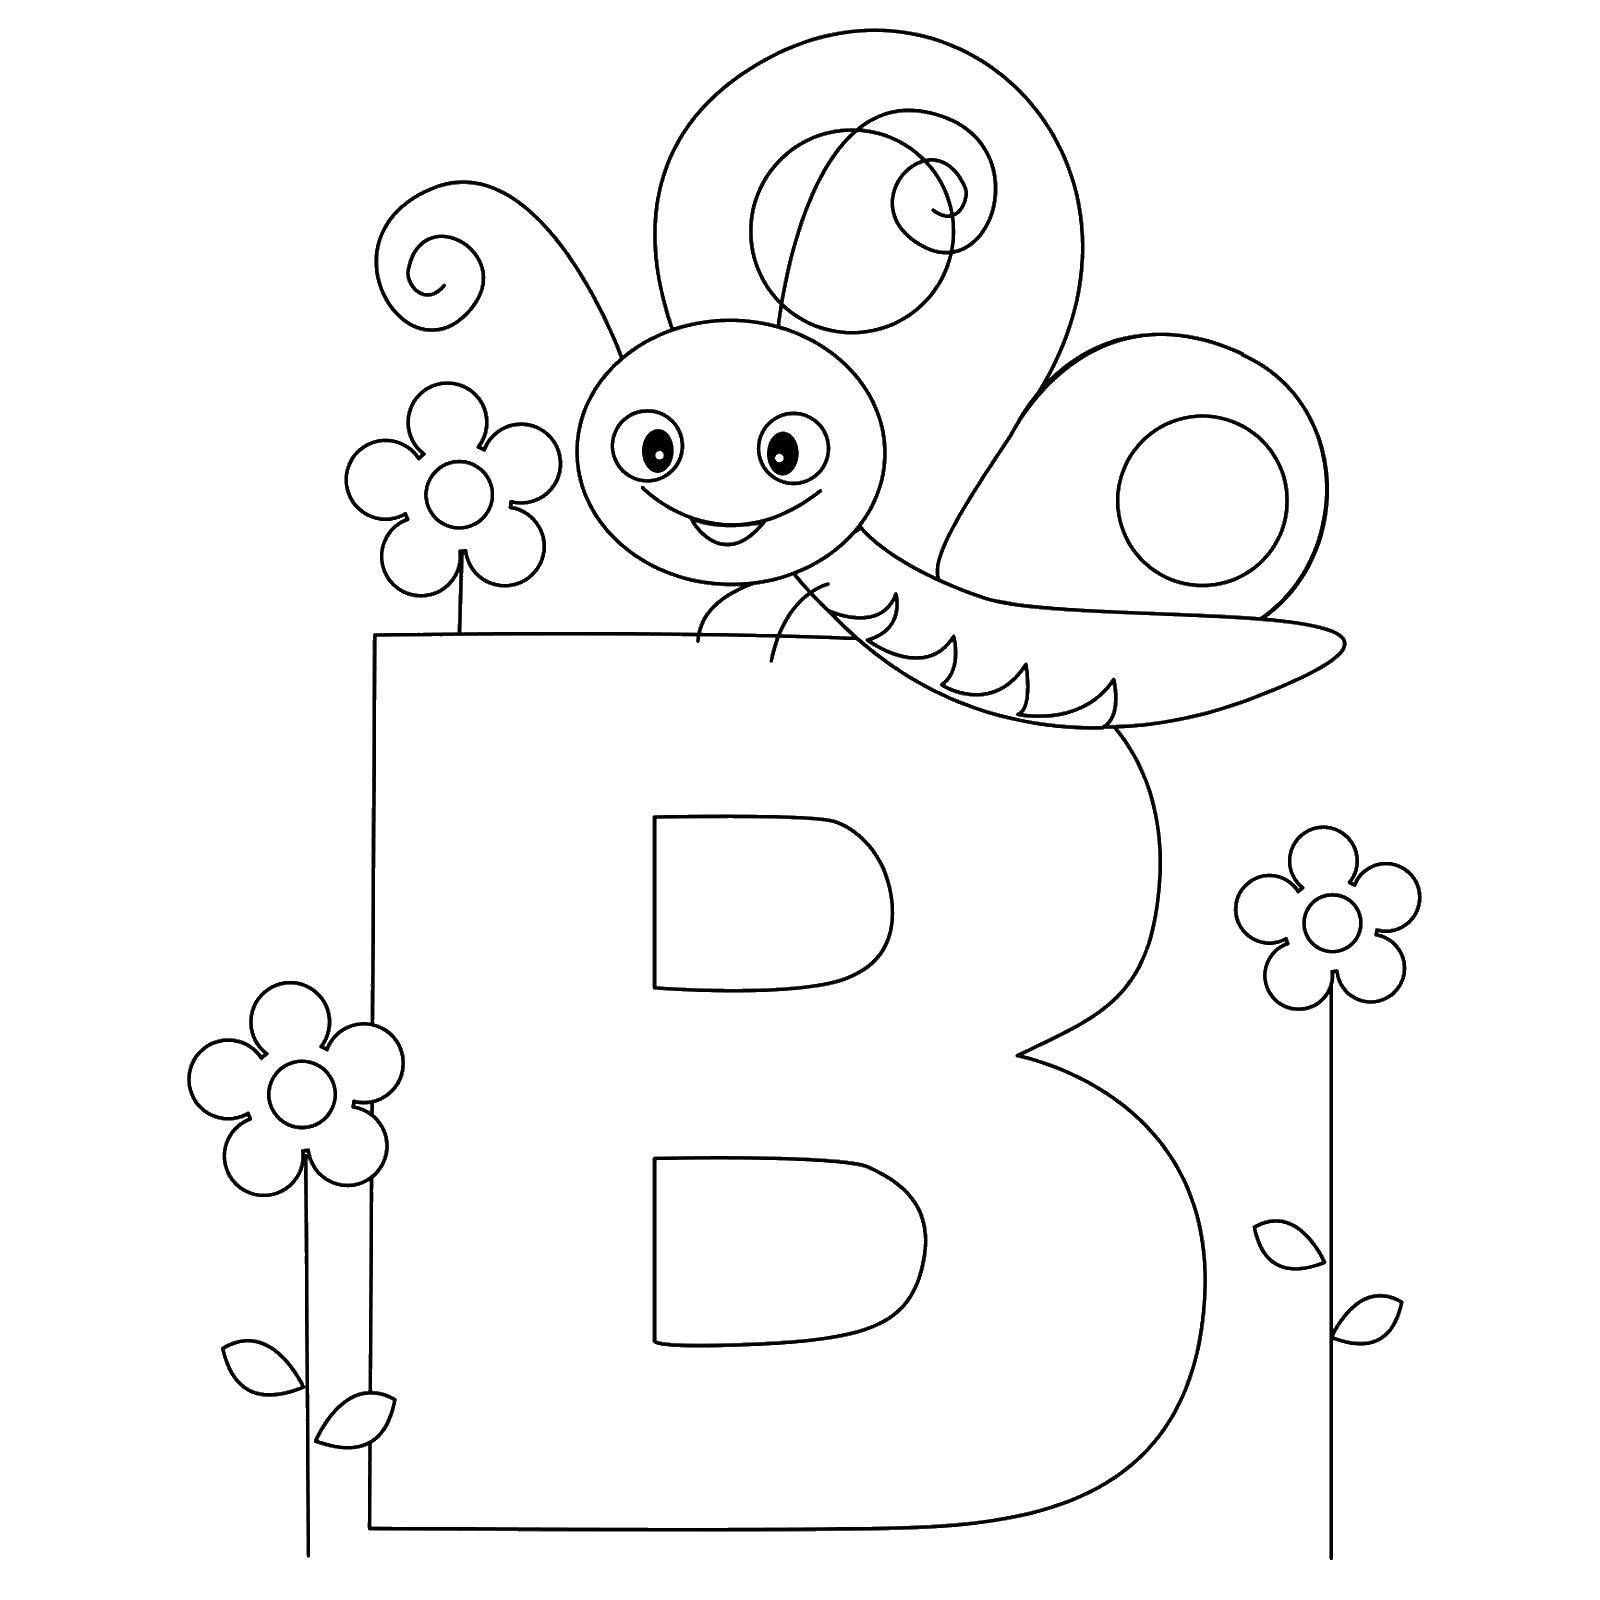 Coloring B butterfly. Category Letters. Tags:  the letters a, b, butterfly.